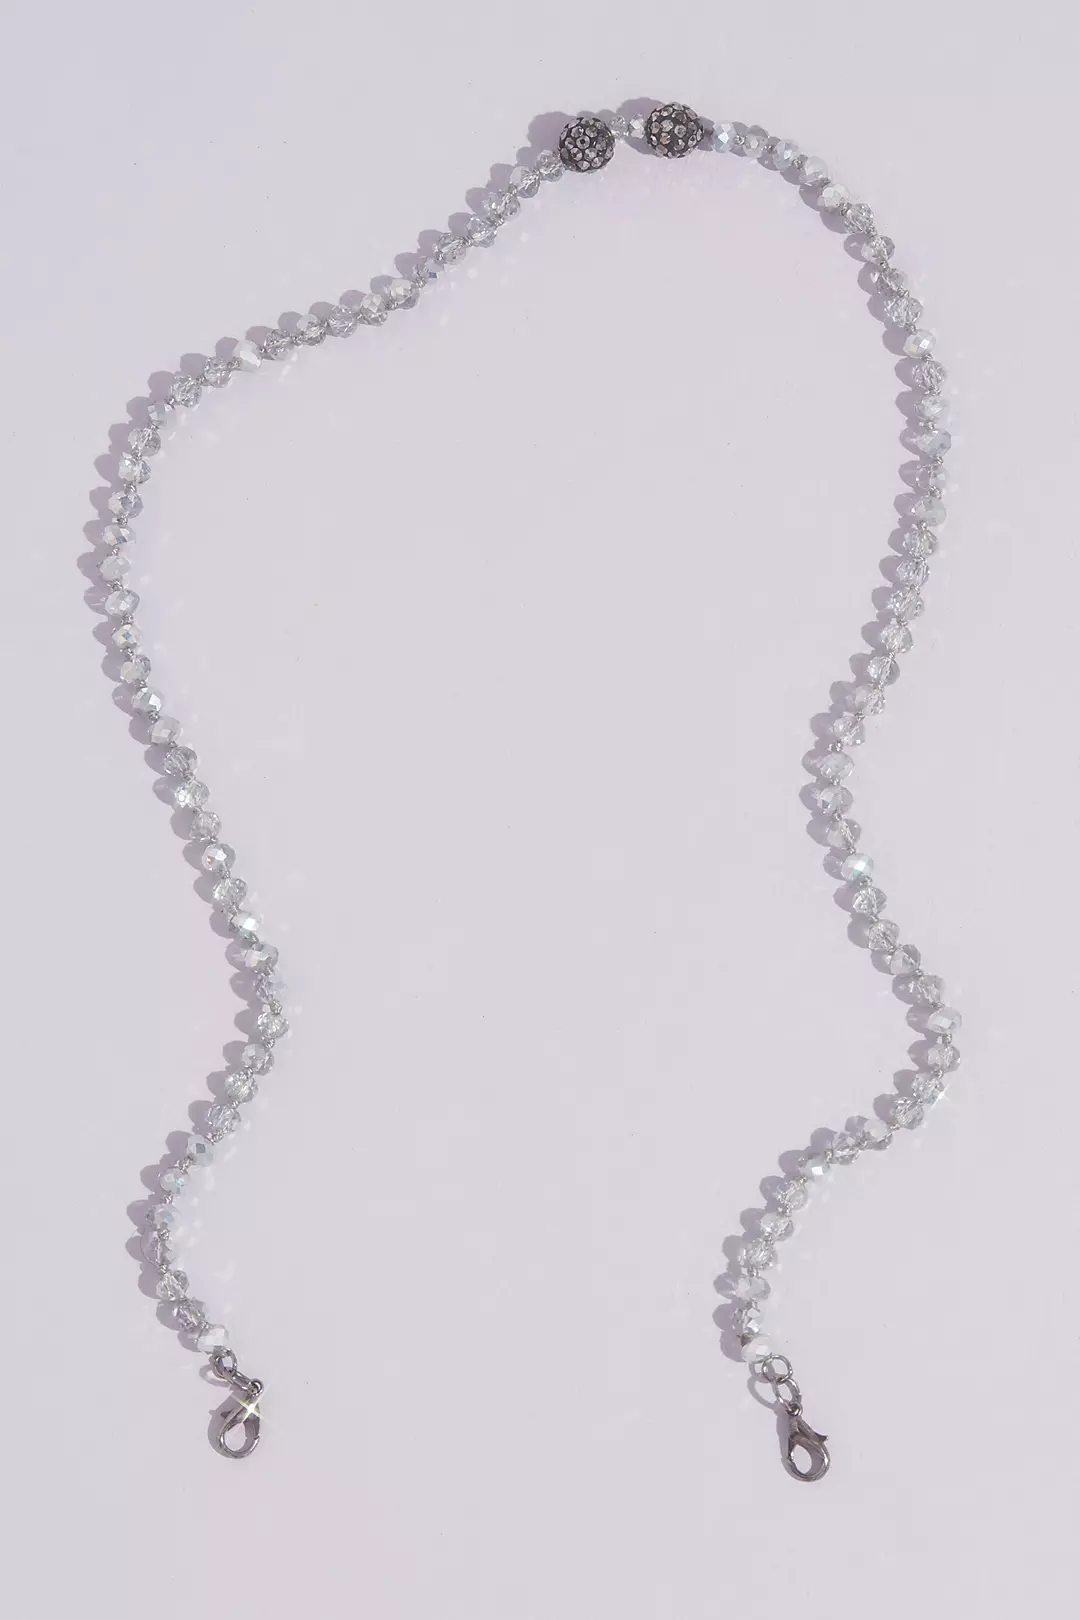 Faceted Crystal Bead Face Mask Chain with Accents Image